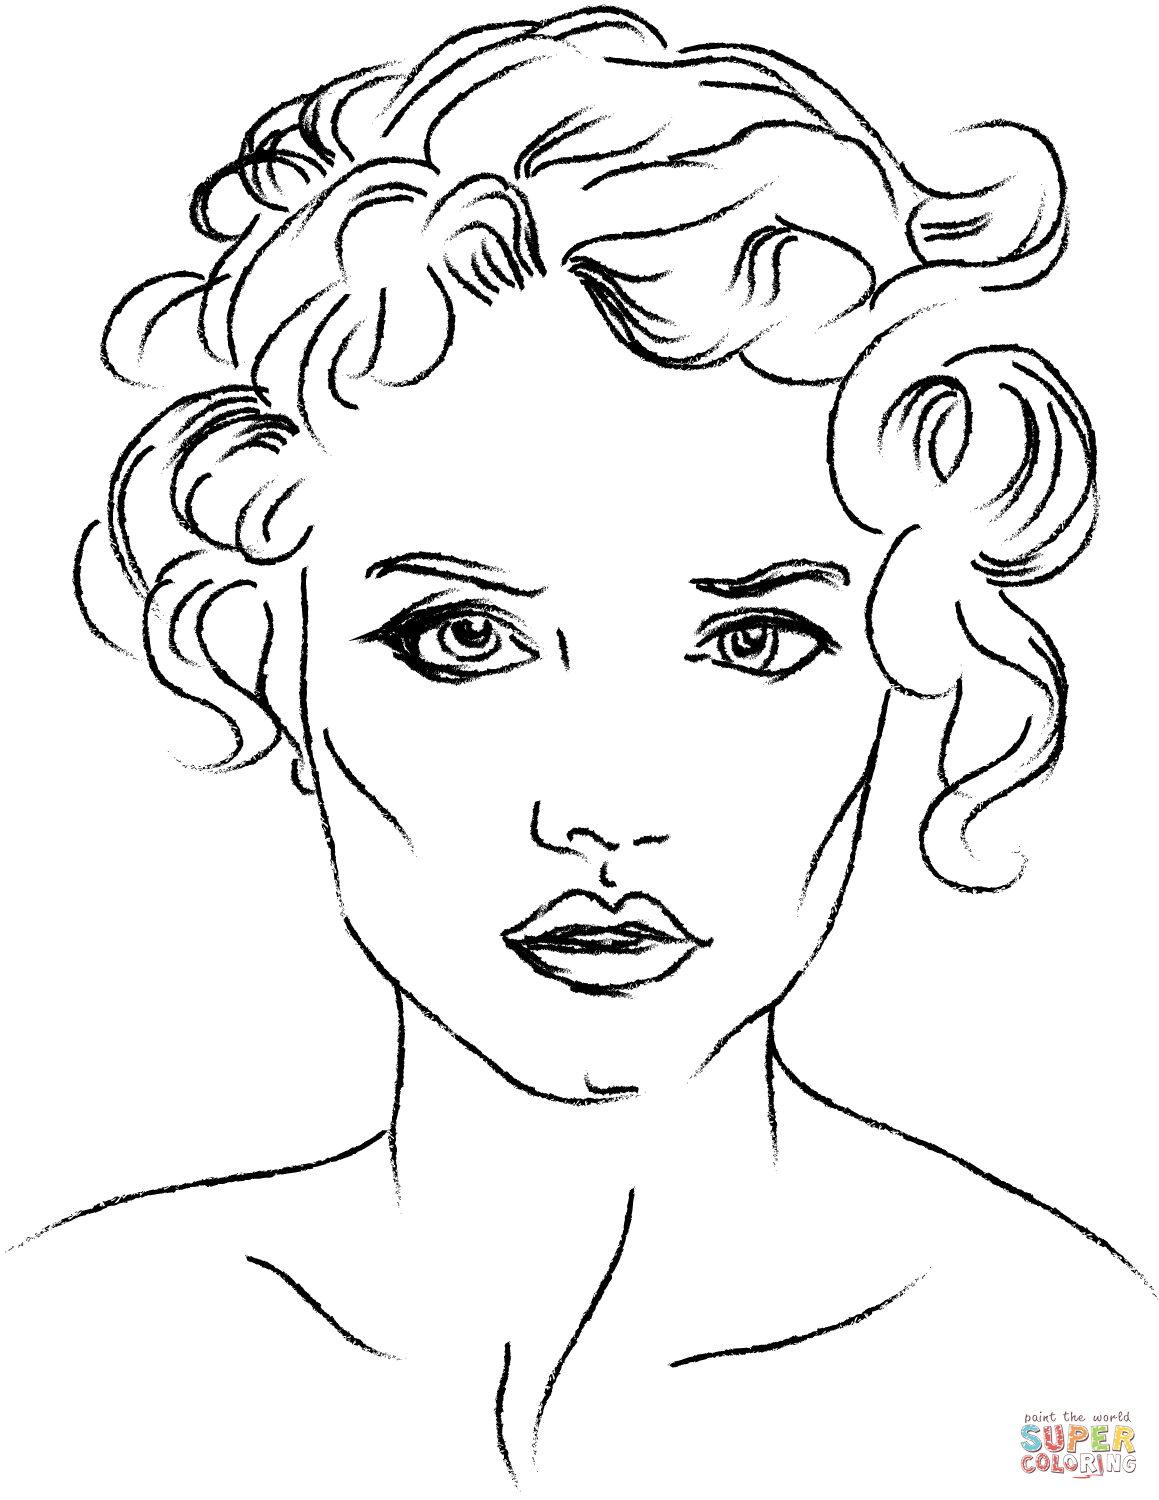 Coloring Pages : Coloring Pages Makeup Inspirational Vitlt ...